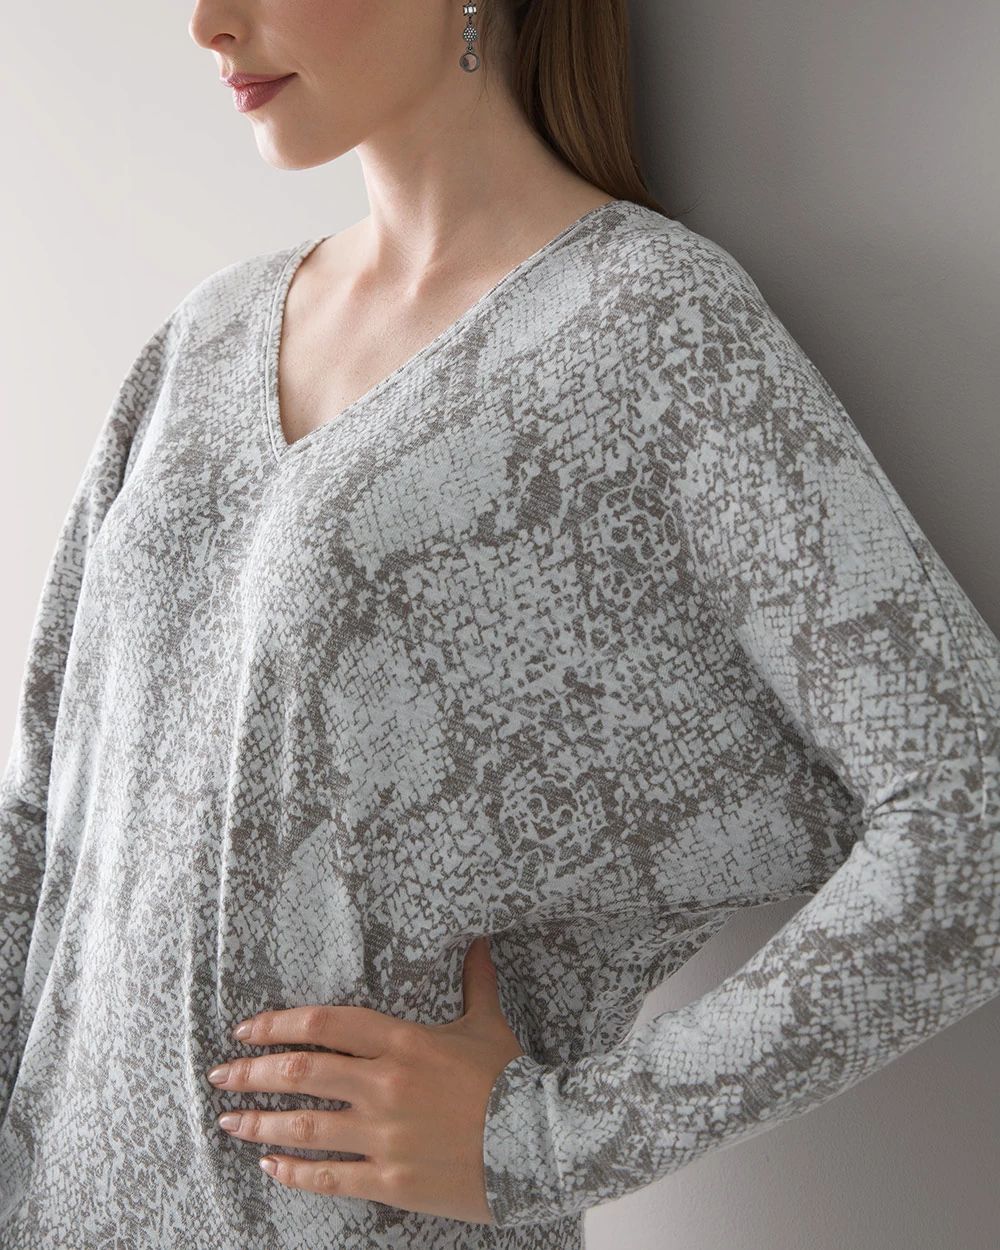 Snake-print Knit Dolman Tunic click to view larger image.